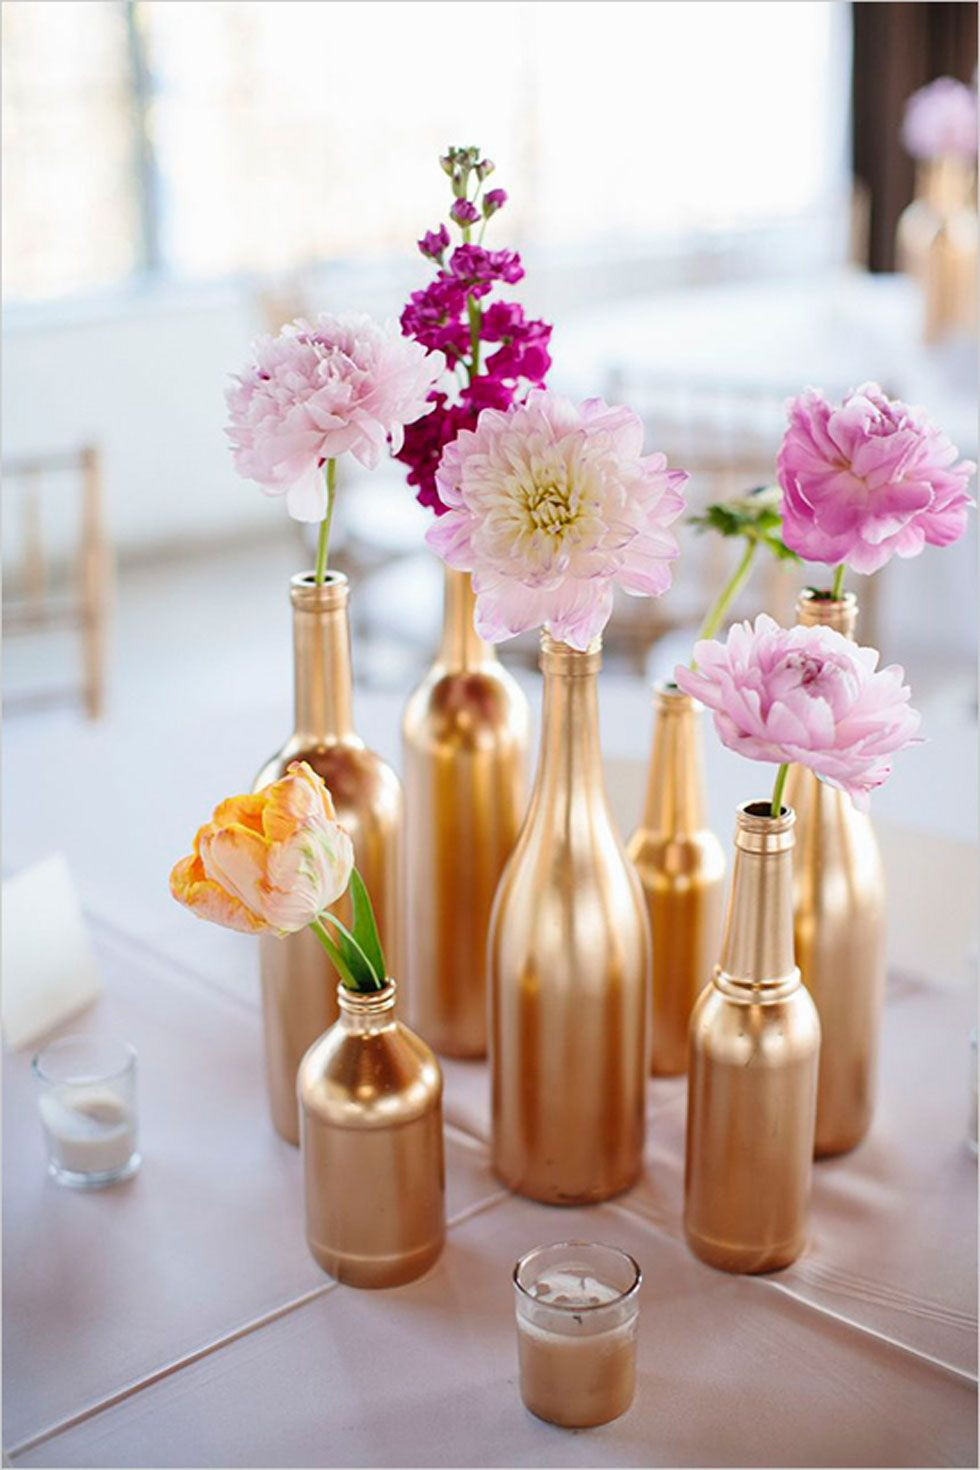 spray paint glass vases white of 55 creative bridal shower ideas that are as special as the bride to regarding these spray painted glass bottles look gorgeous as simple vases for individual blossoms